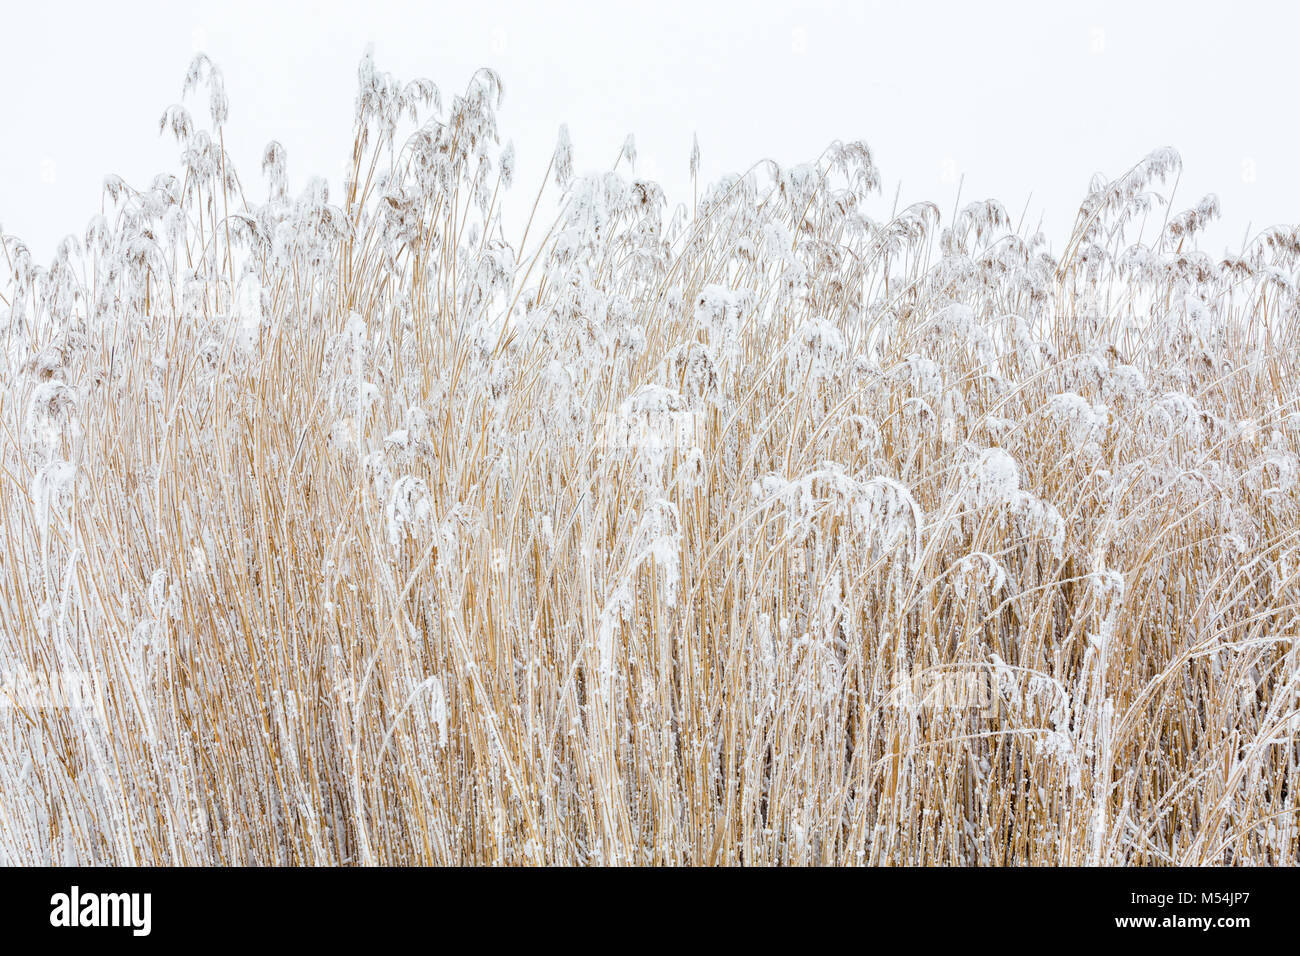 Reeds with frost in winter Stock Photo